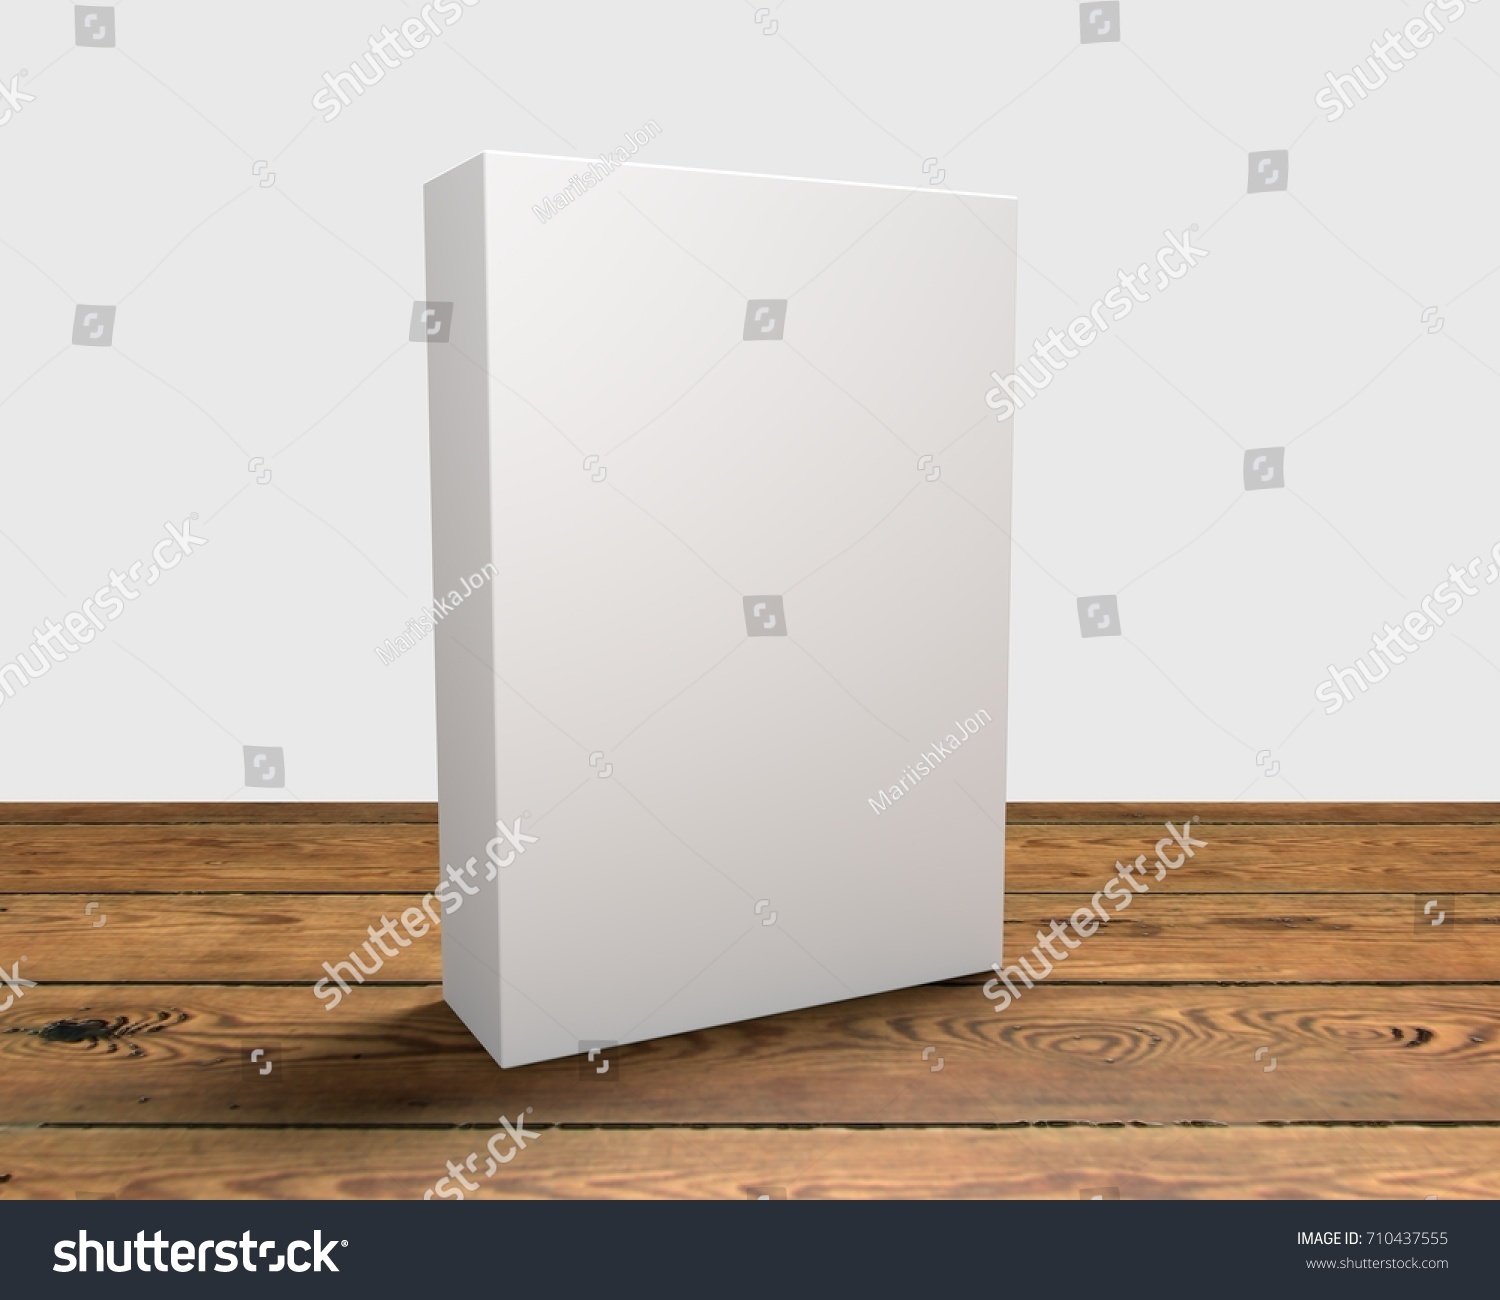 3D render of cereal like box on a wooden surface #710437555